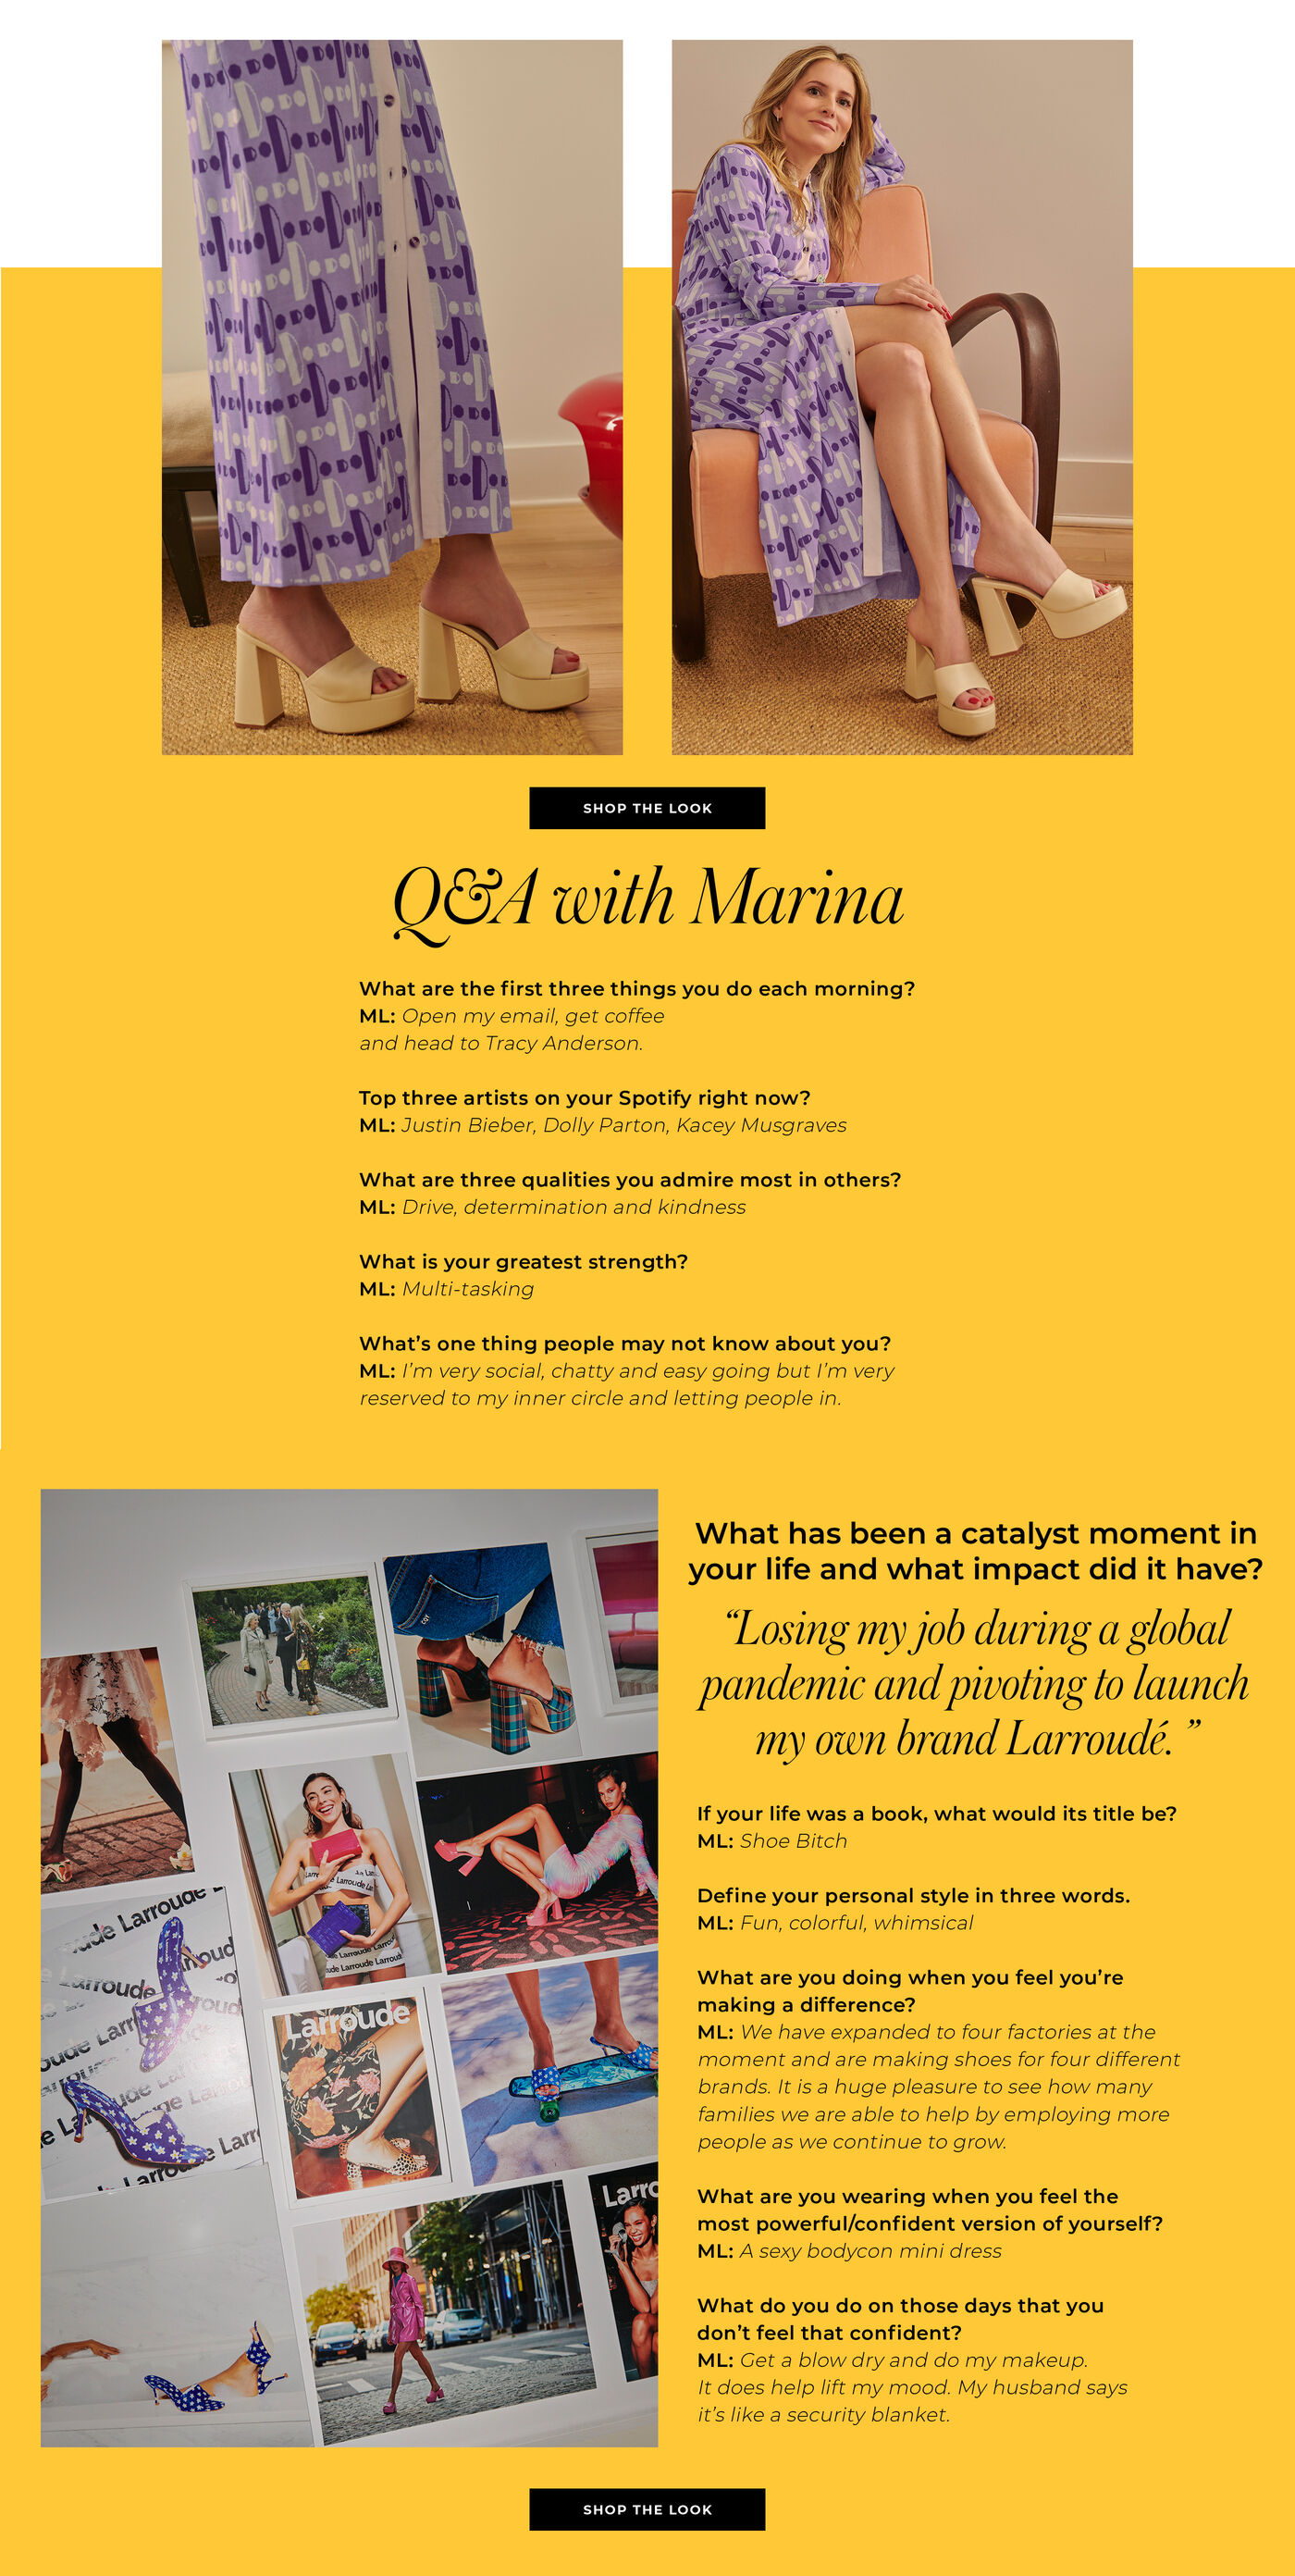 "Q&A with Marina What are the first three things you do each morning? Open my email, get coffee and head to Tracy Anderson. Top three artists on your Spotify right now?  Justin Bieber, Dolly Parton, Kacey Nusgraves What are three qualities you admire most in others?  Drive, determination and kindness  What is your greatest strength? Multi-tasking What’s one thing people may not know about you? I’m very social, chatty and easy going but I’m very reserved to my inner circle and letting people in.   What has been a catalyst moment in your life and what impact did it have?  Losing my job during a global pandemic and pivoting to launch my own brand Larroudé.   If your life was a book, what would its title be?  Shoe Bitch  Define your personal style in three words. Fun, colorful, whimsical What are you doing when you feel you’re making a difference? We have expanded to four factories at the moment and are making shoes for four different brands. It is a huge pleasure to see how many families we are able to help by employing more people as we continue to grow. What are you wearing when you feel the most powerful/confident version of yourself?  A sexy bodycon mini dress.   What do you do on those days that you don’t feel that confident? Get a blow dry and do my makeup. It does help lift my mood. My husband says it’s like a security blanket."